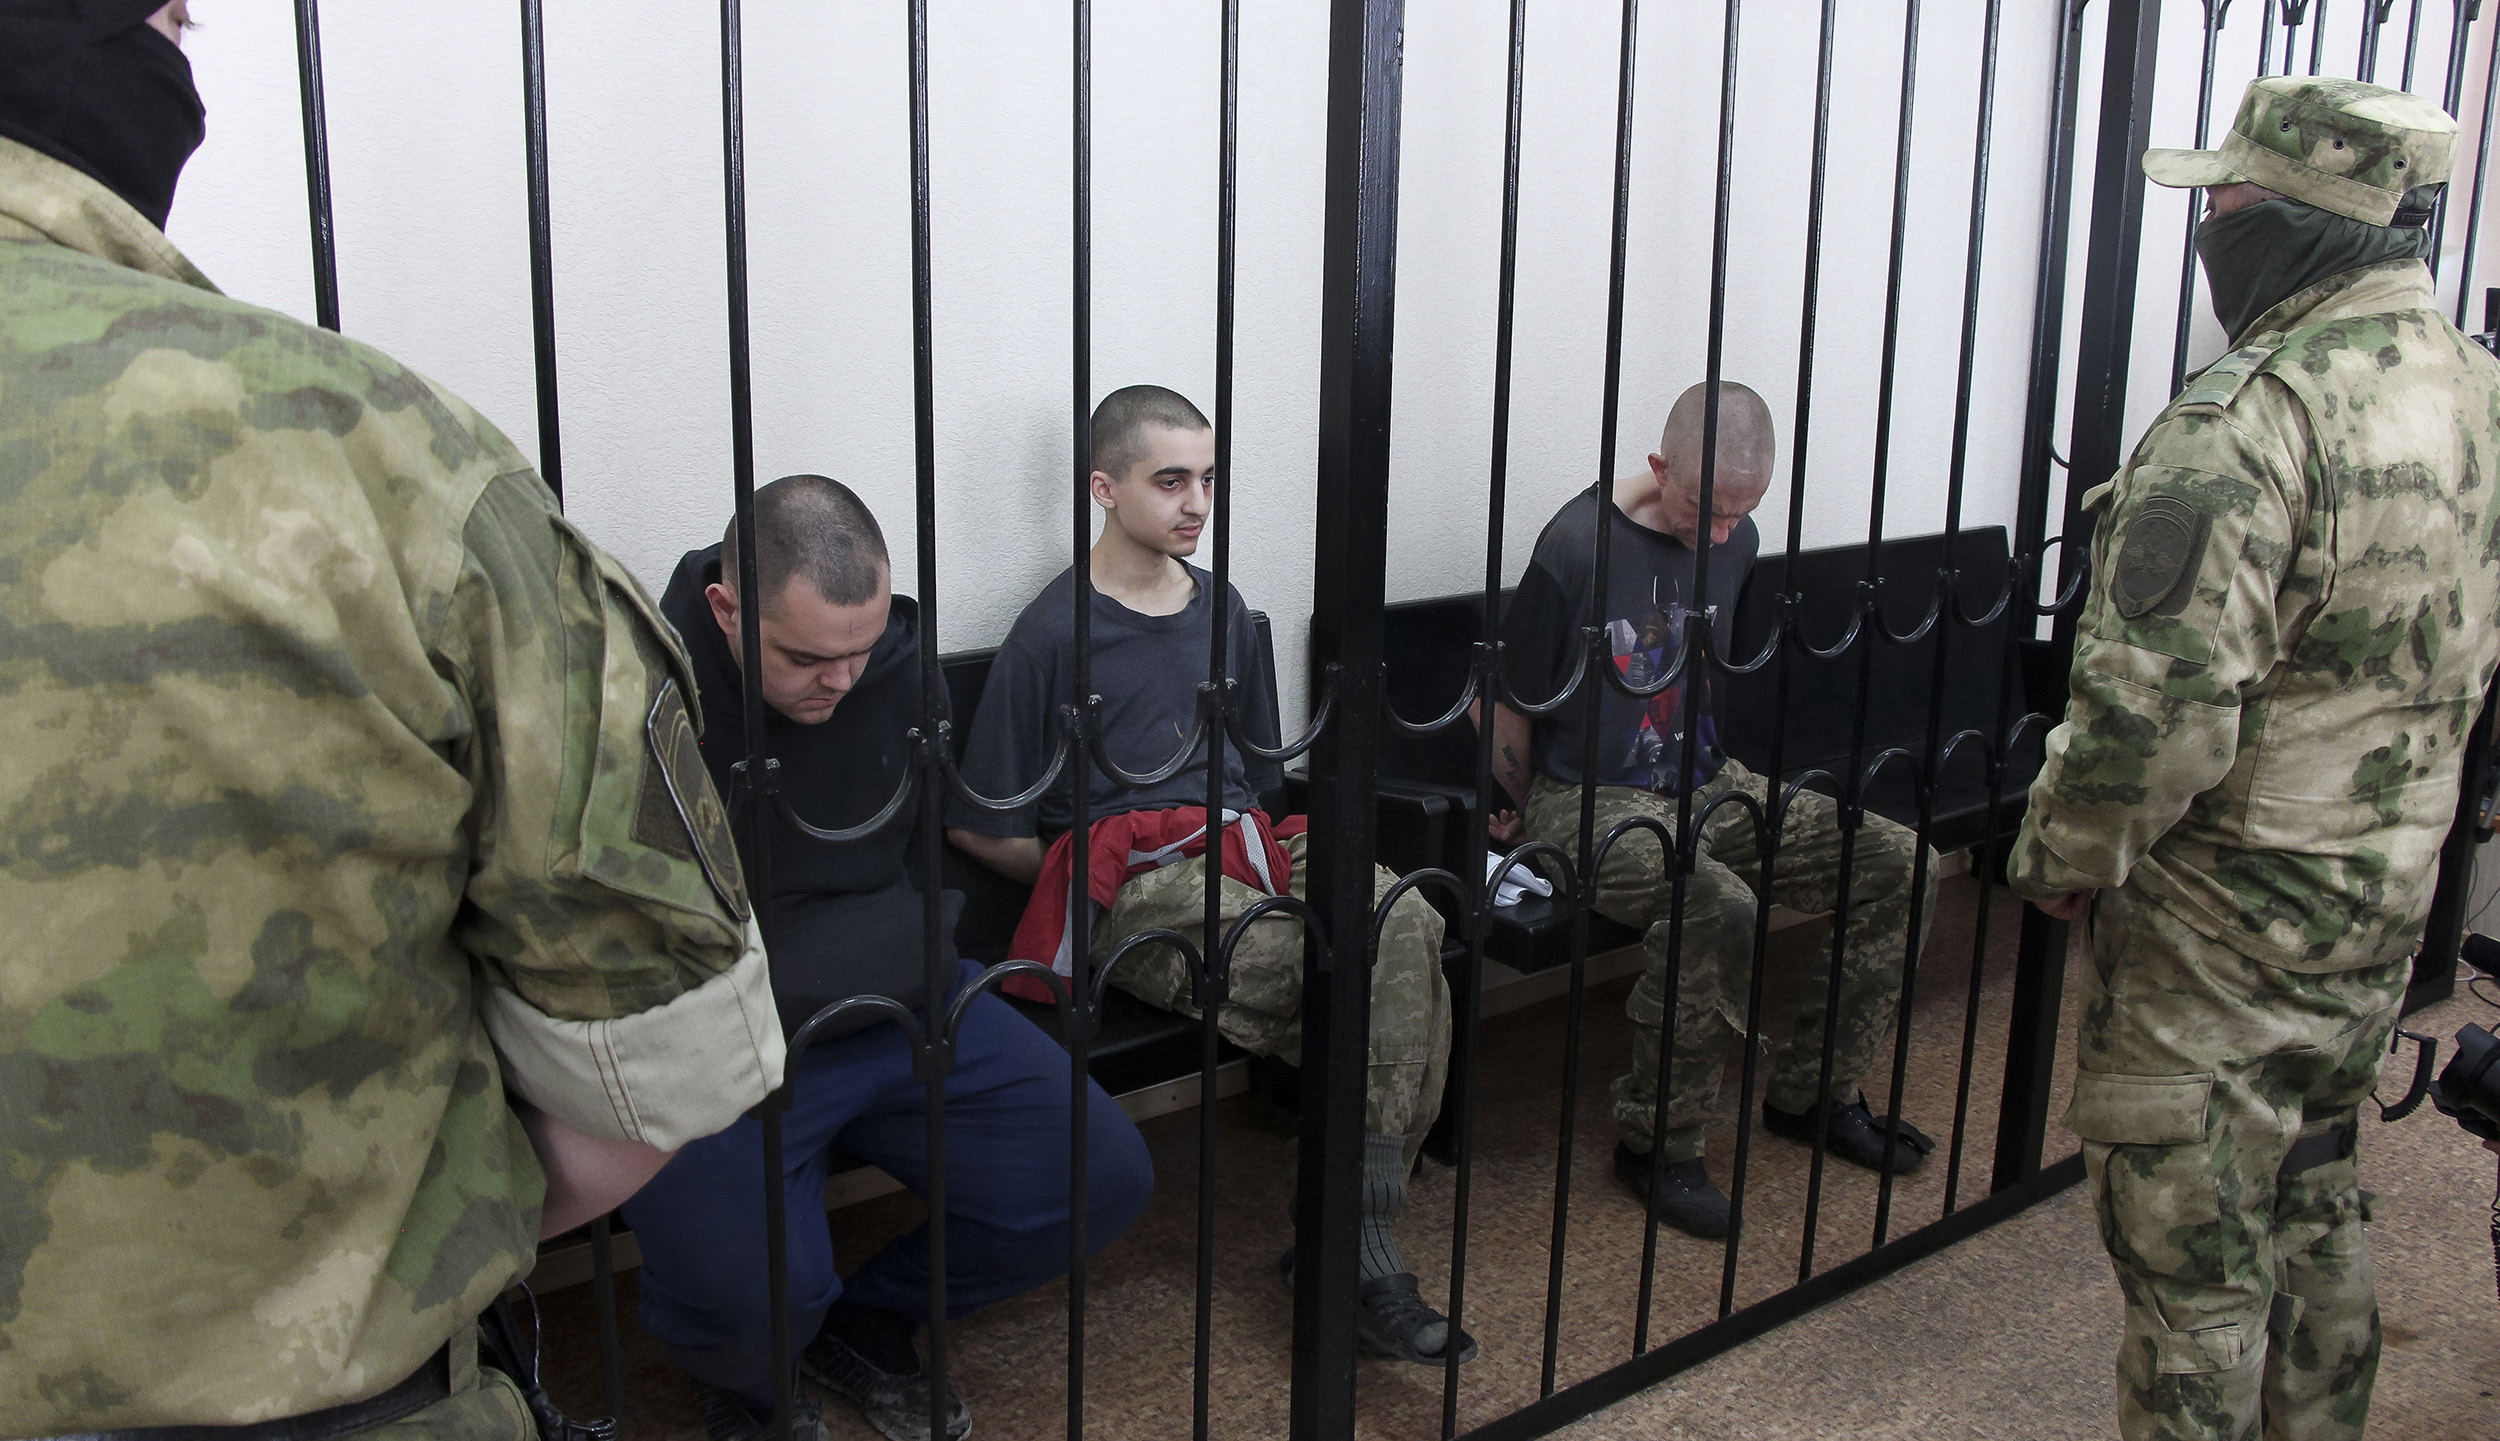 Two British citizens Aiden Aslin, left, and Shaun Pinner, right, and Moroccan Saaudun Brahim, center, sit behind bars in a courtroom in Donetsk, eastern Ukraine, on June 9.